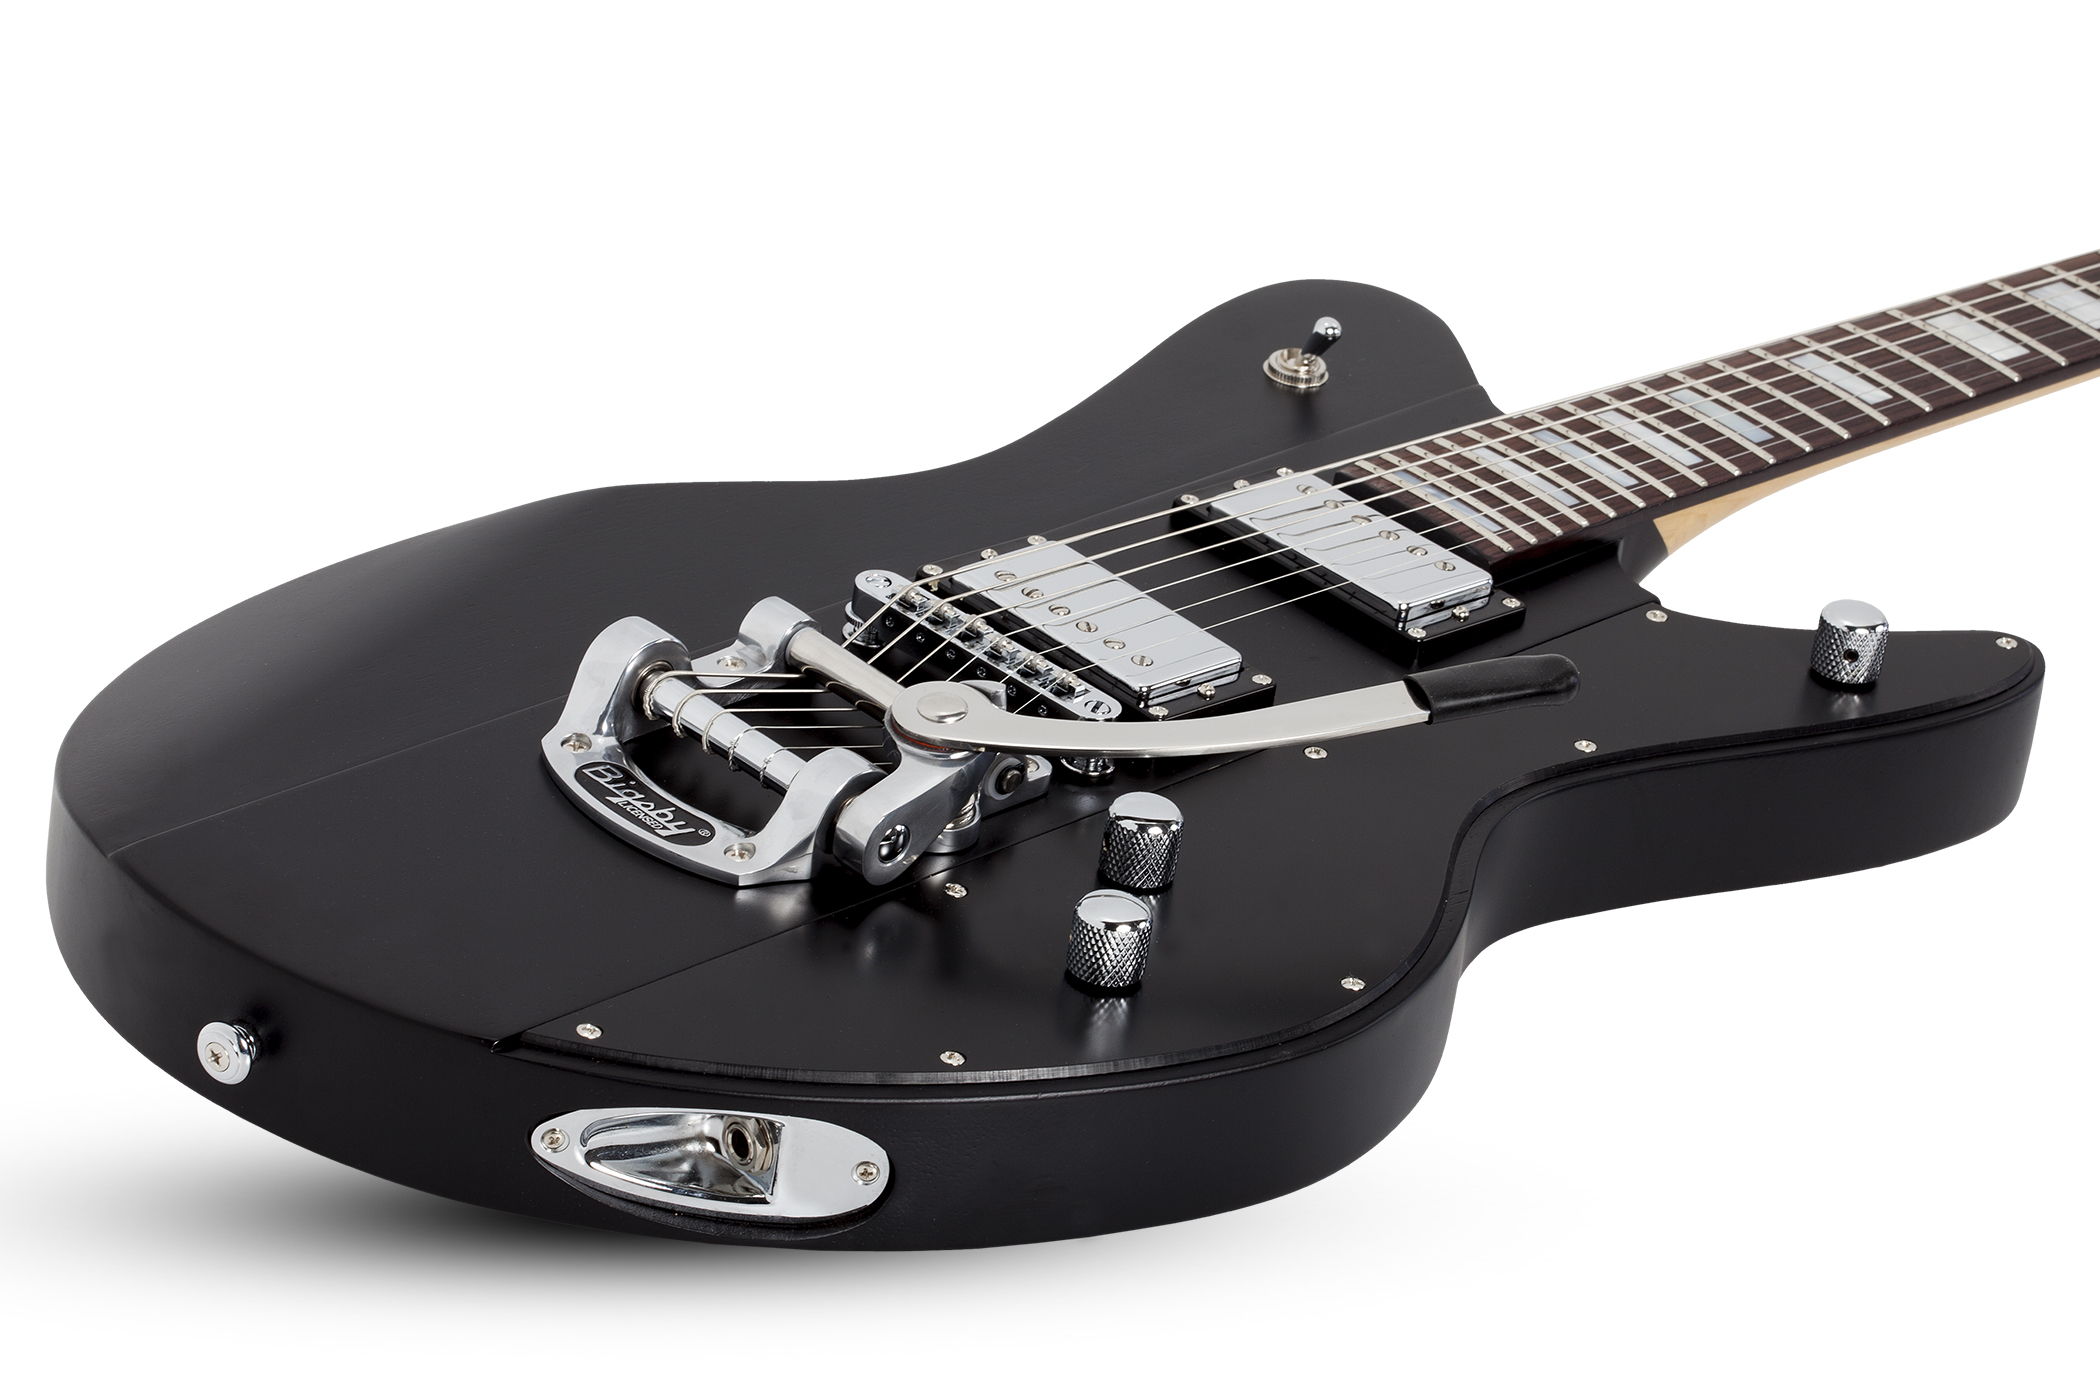 realce Puntualidad Martin Luther King Junior Schecter Robert Smith UltraCure - black pearl Solid body electric guitar  black